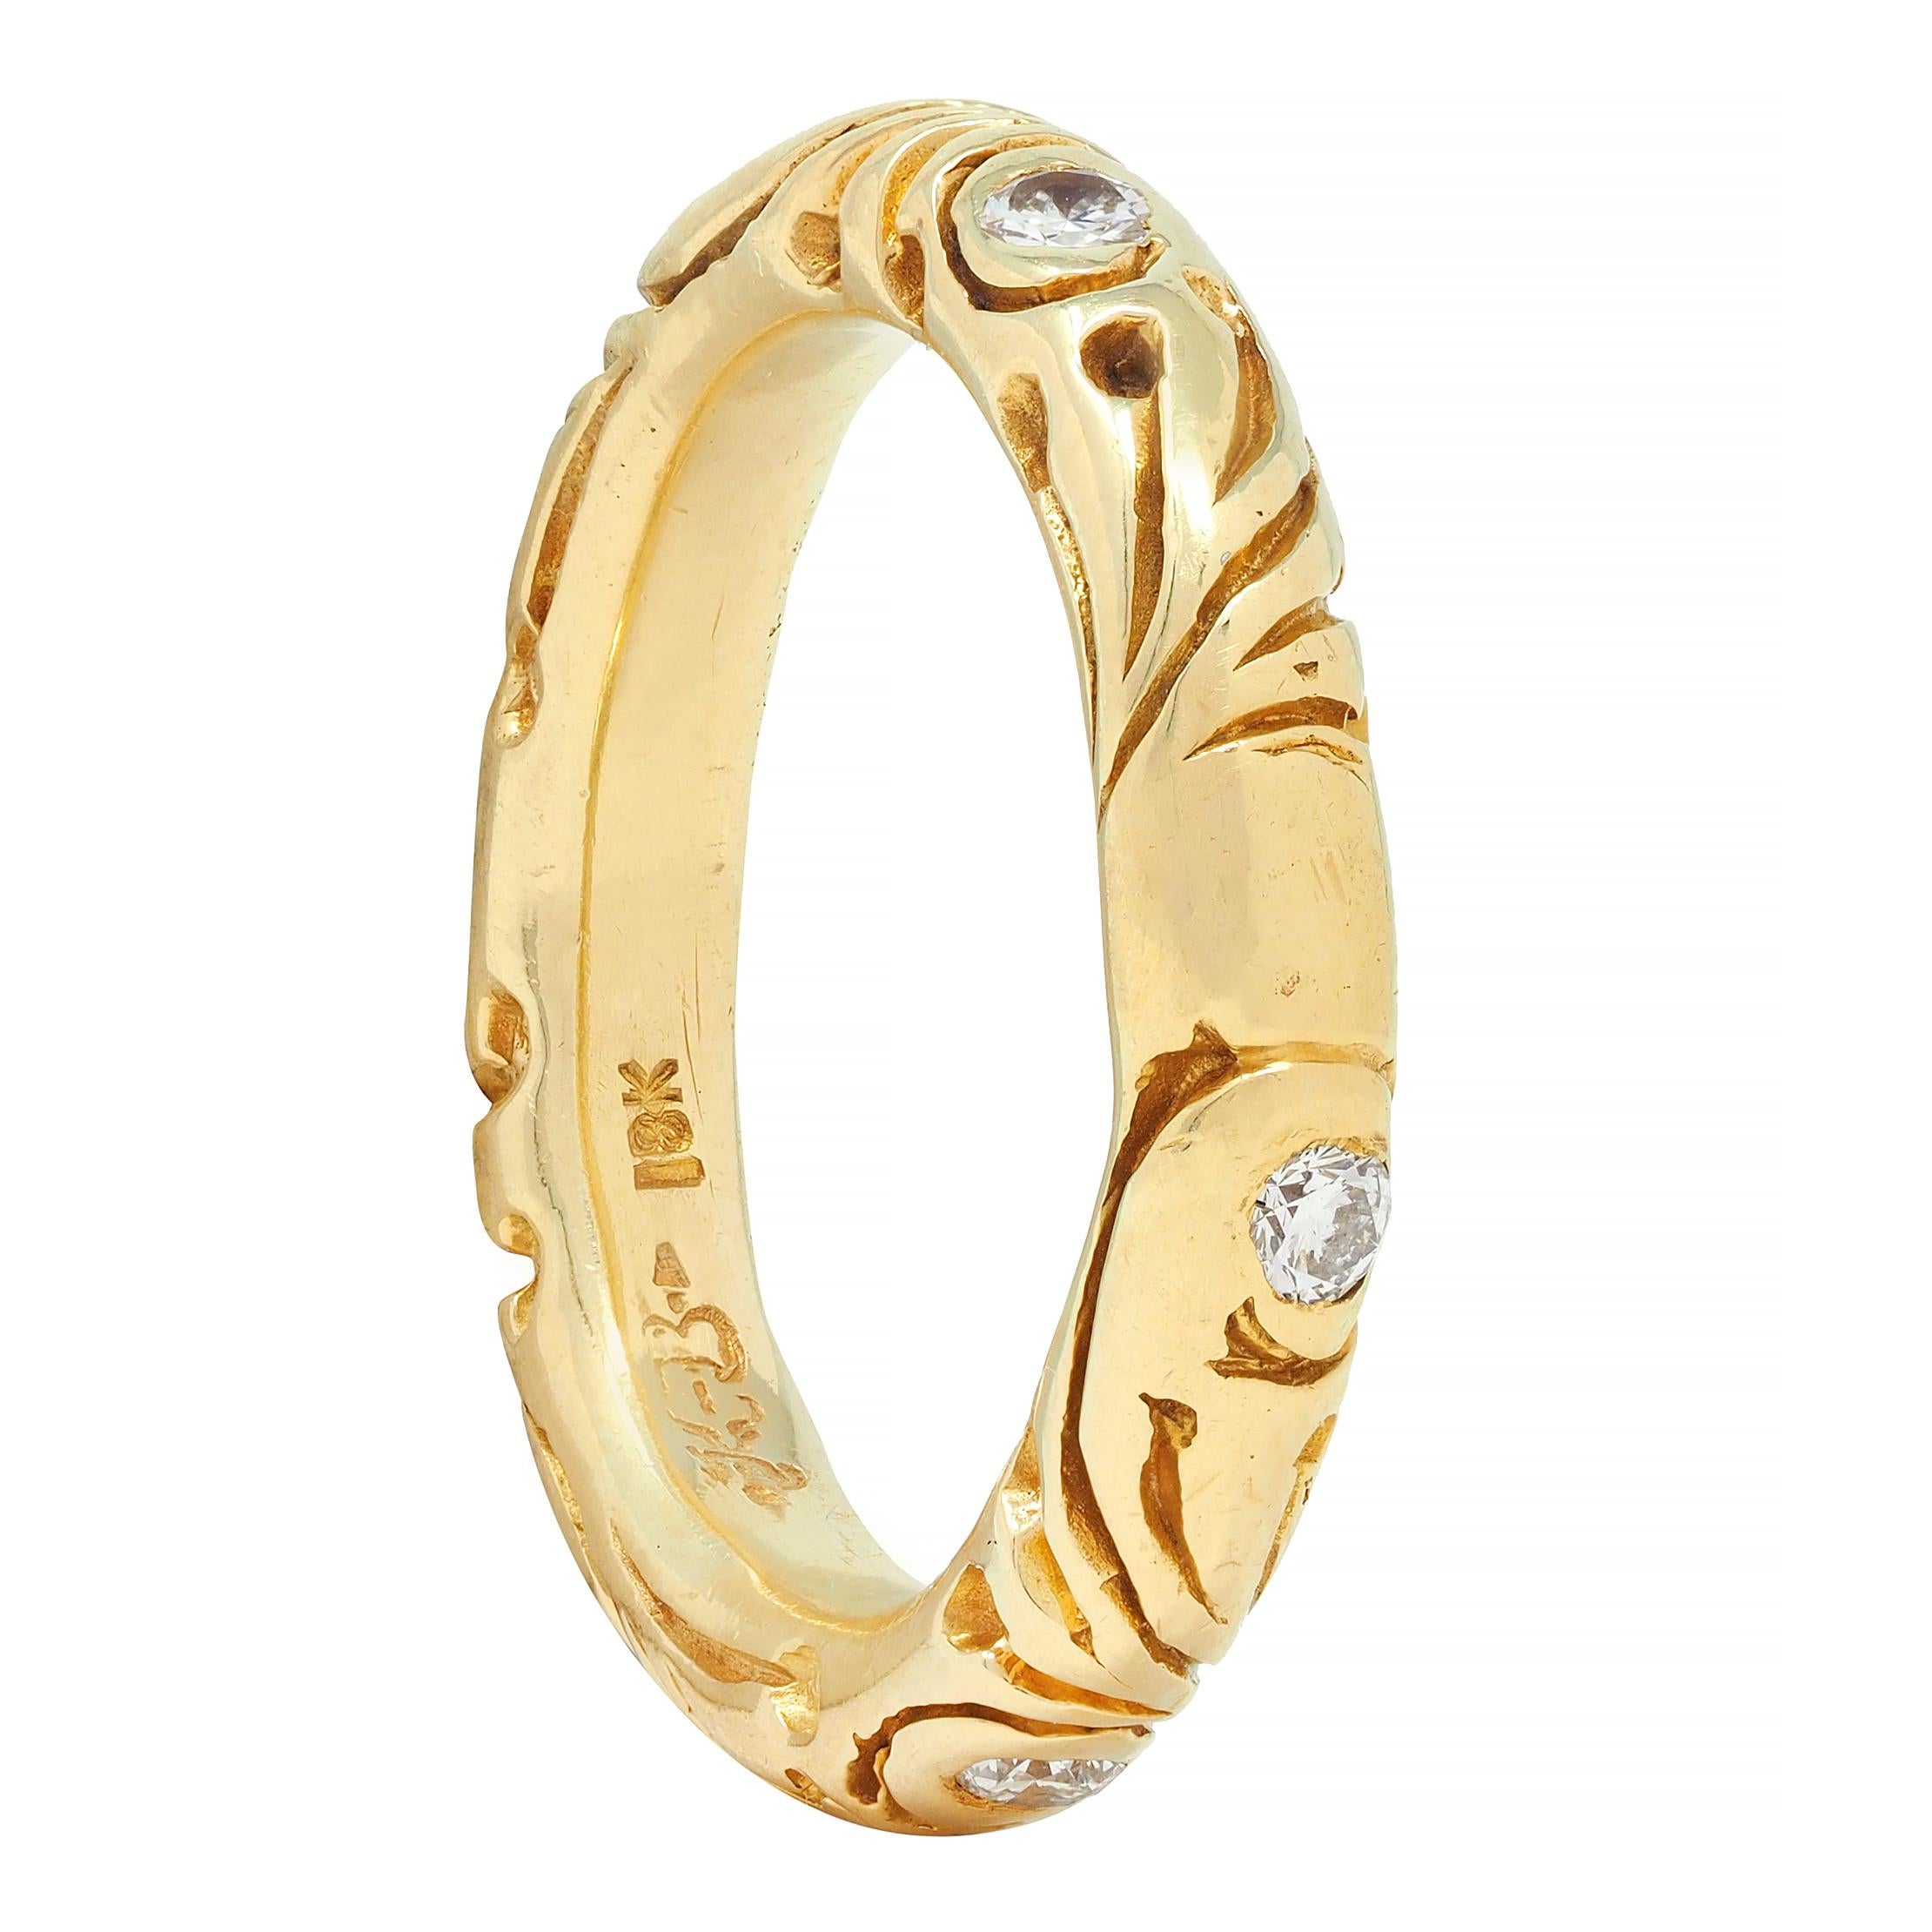 Designed as a rounded gold band 
With deeply grooved scroll motif fully around
Featuring flush set round brilliant cut diamonds 
Weighing approximately 0.36 carat total 
G/H color with VS2 clarity
With high polish finish 
Stamped for 18 karat gold